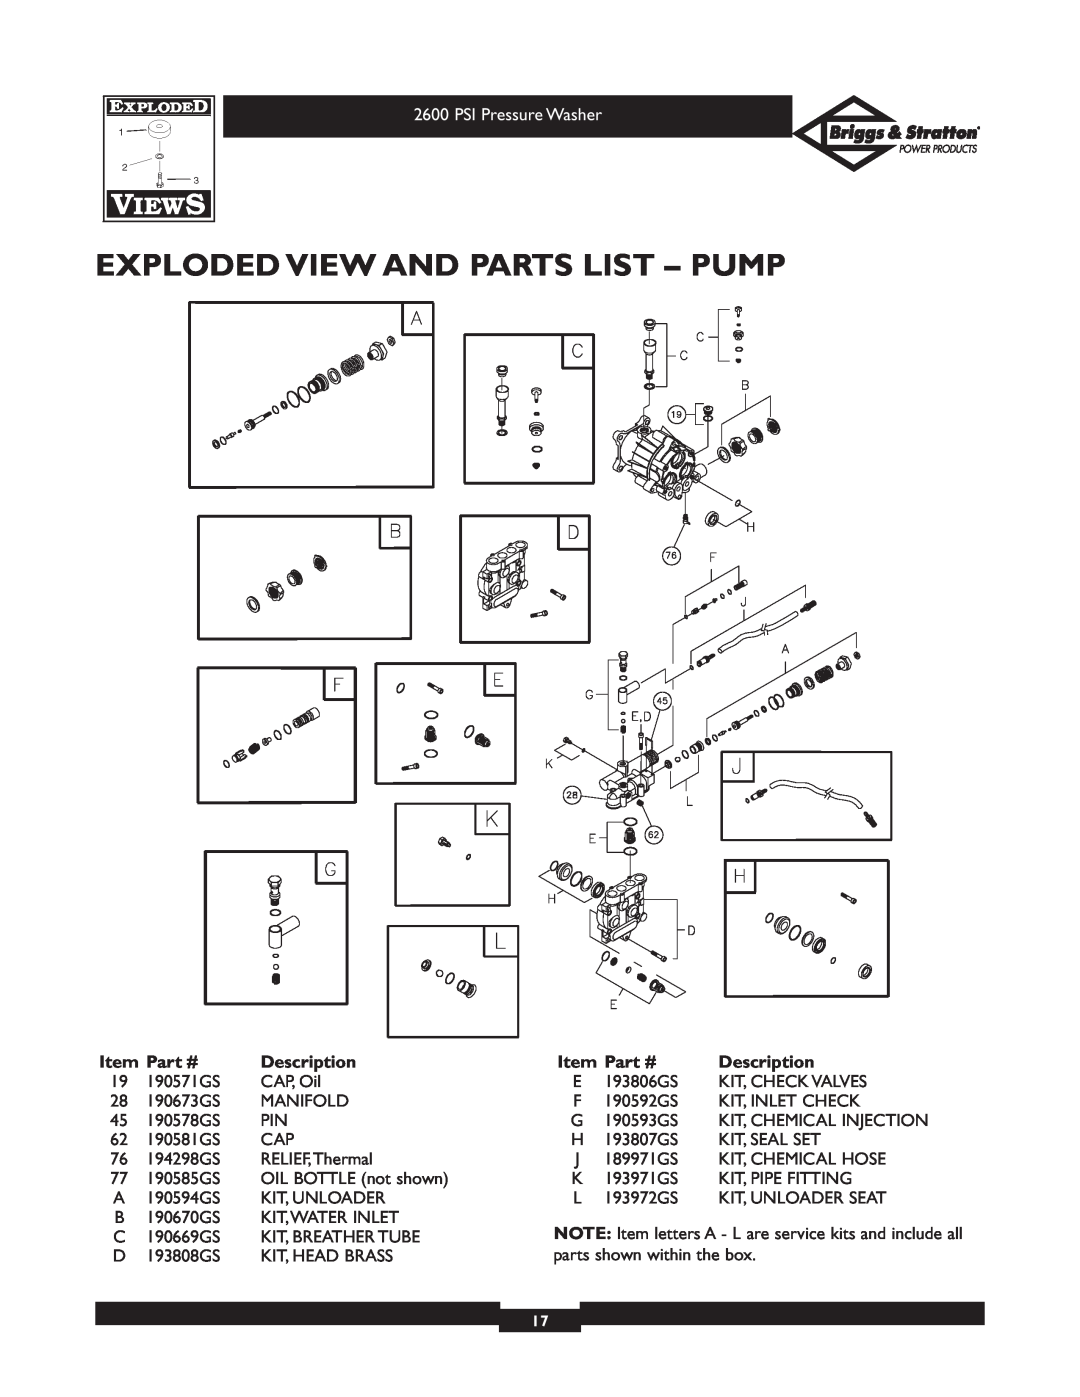 Briggs & Stratton 20216 owner manual Exploded View And Parts List - Pump, PSI Pressure Washer, Description 